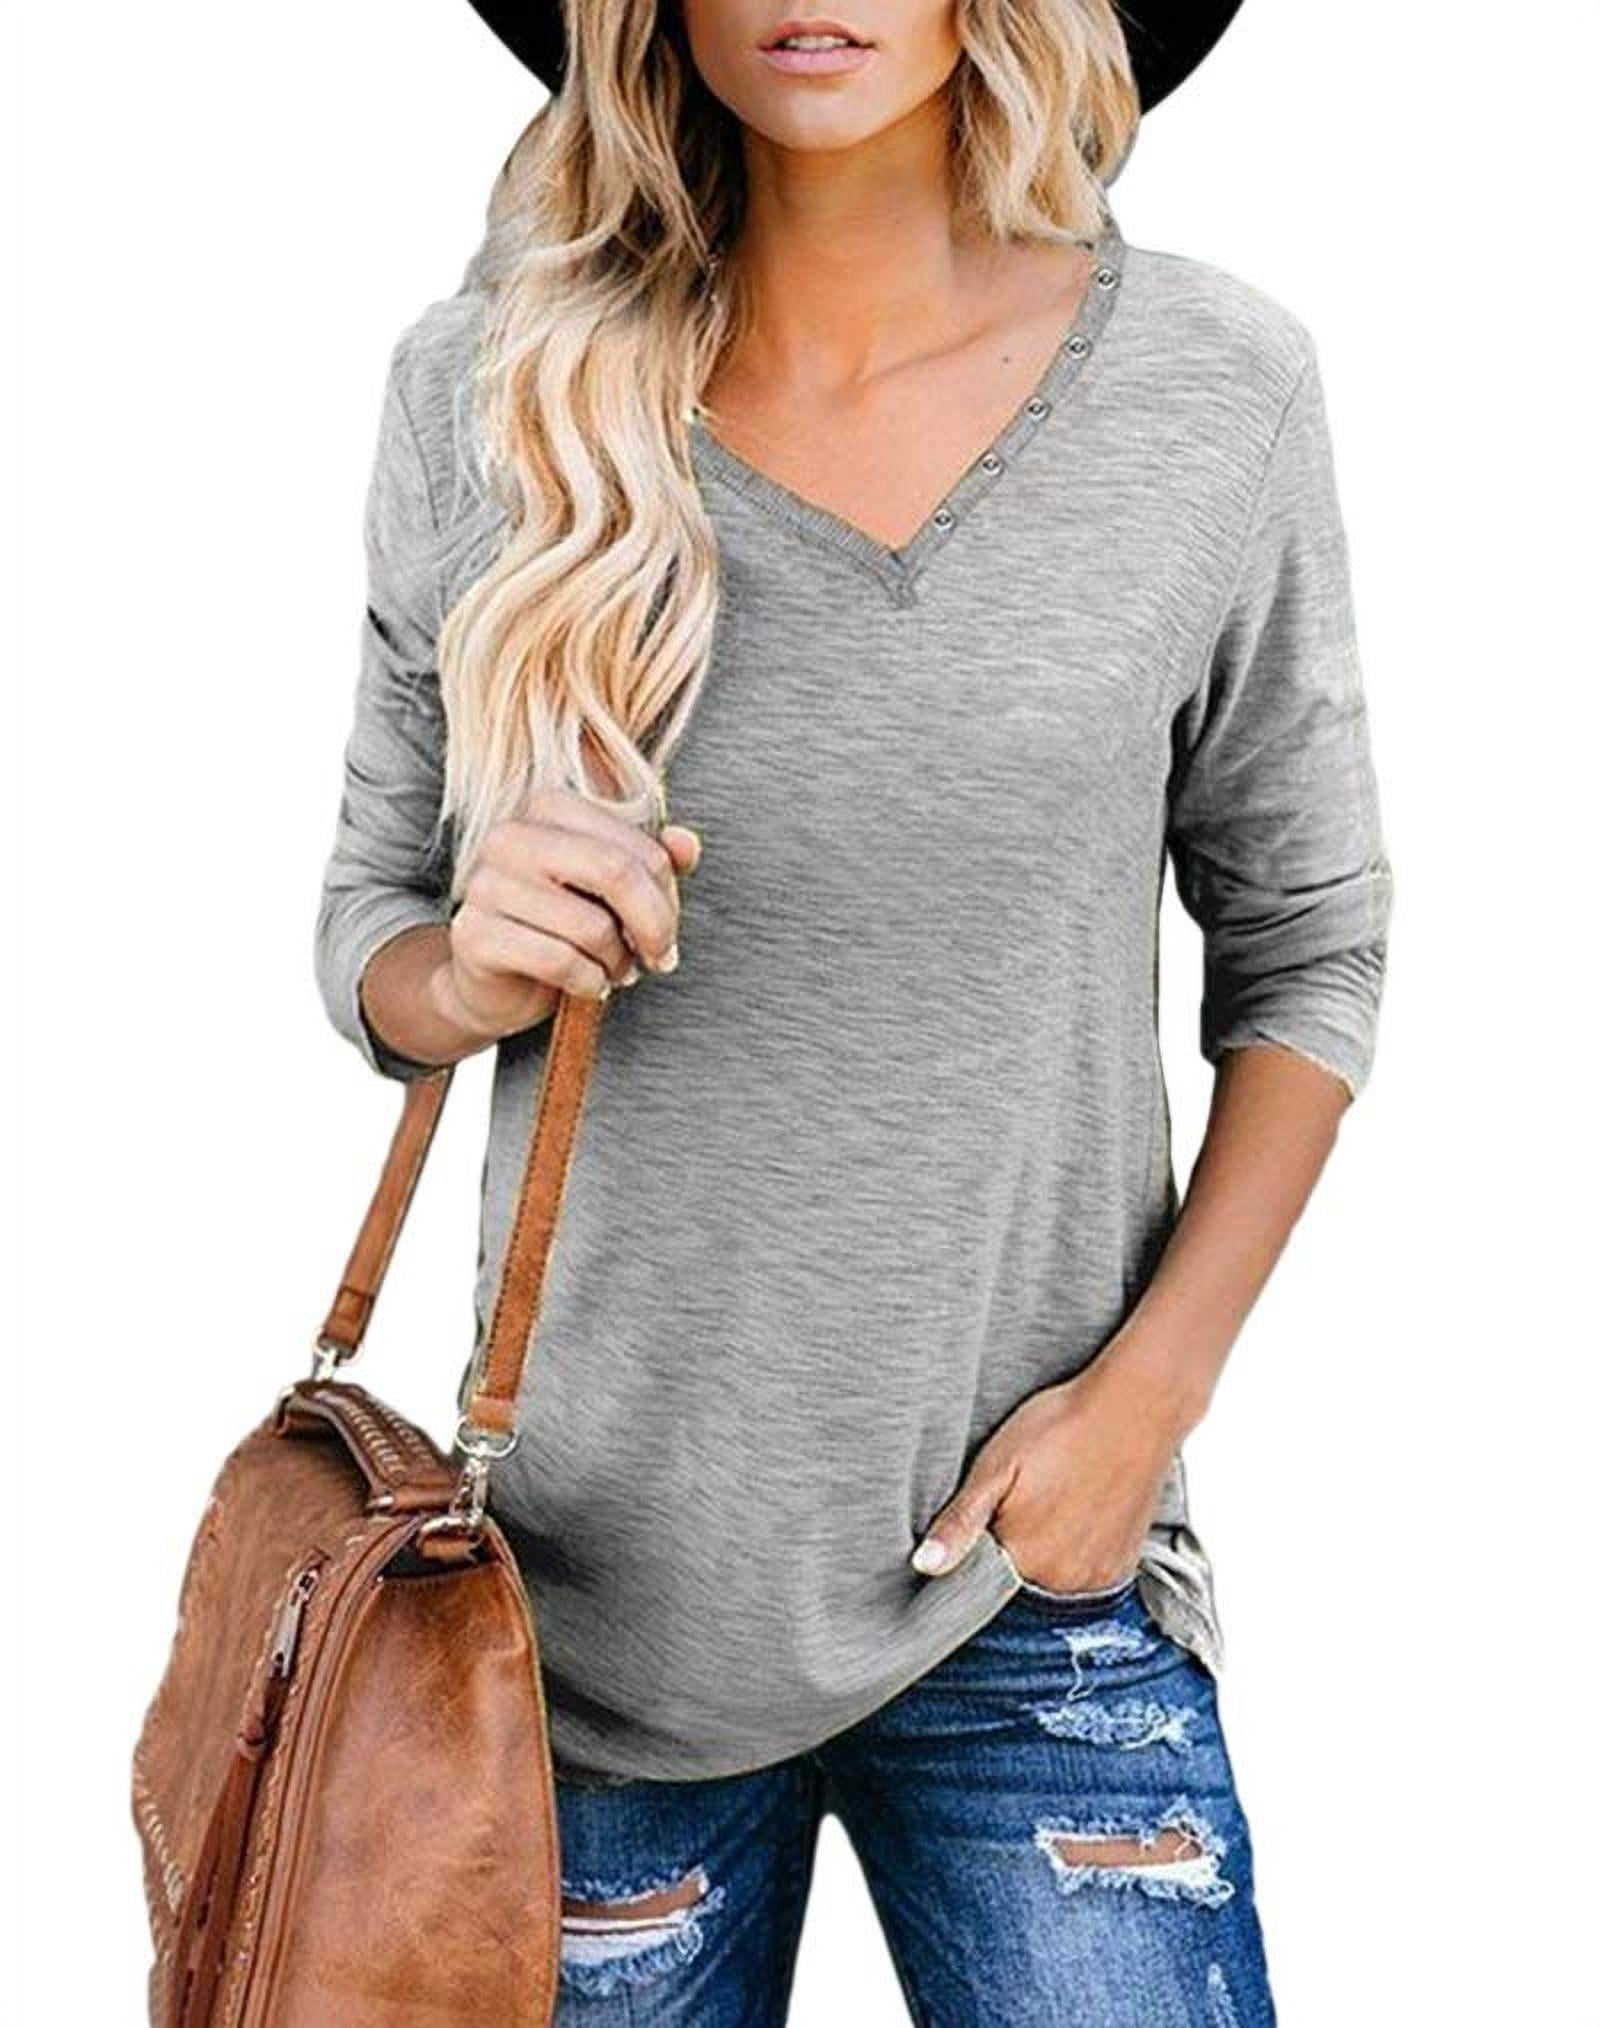 Sherrylily Women 3/4 Sleeve V Neck T Shirts Casual Summer Loose Tops ...